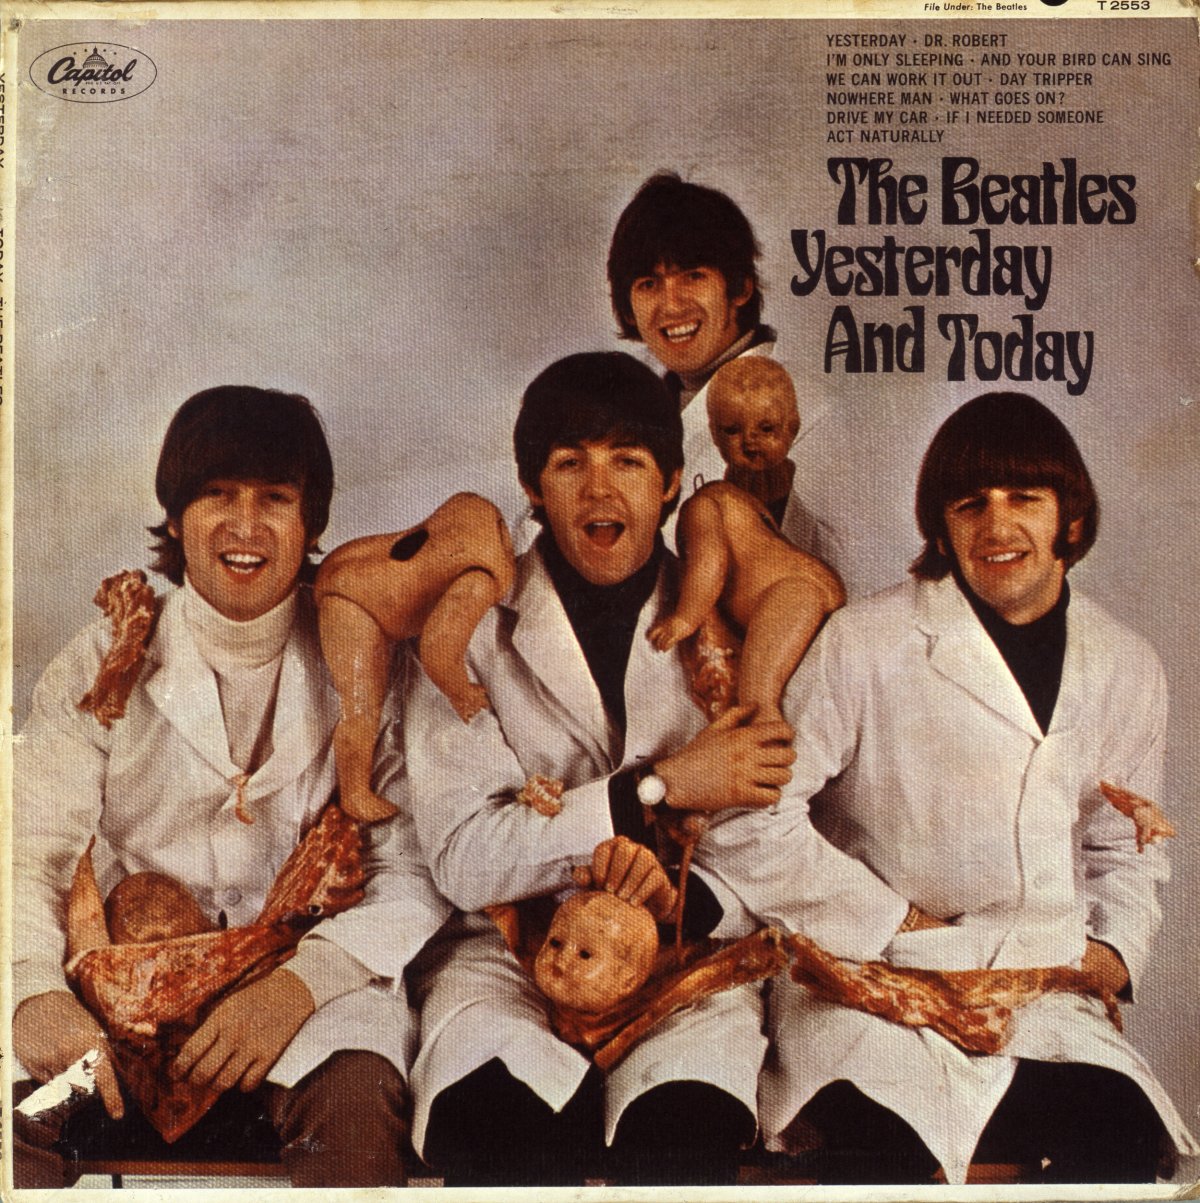 Original Beatles "Yesterday and Today" cover